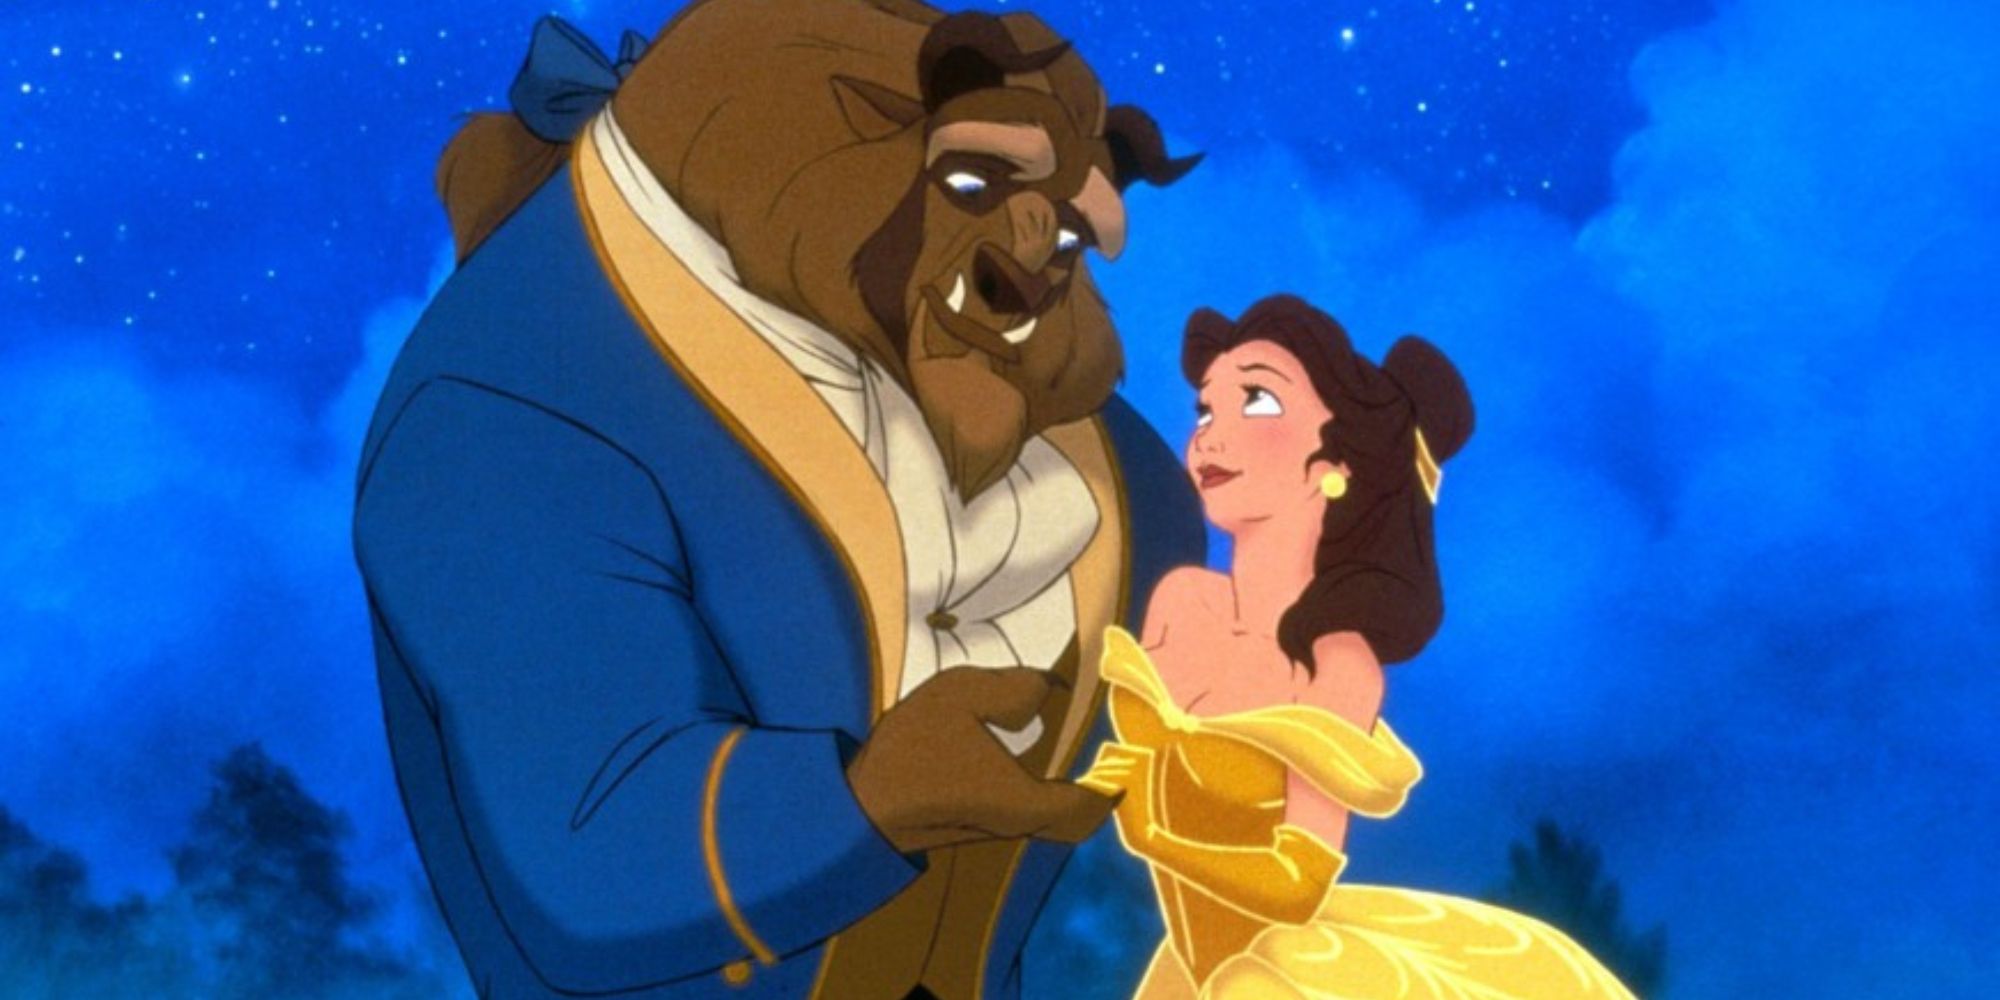 Belle And The Beast in Beauty and the Beast